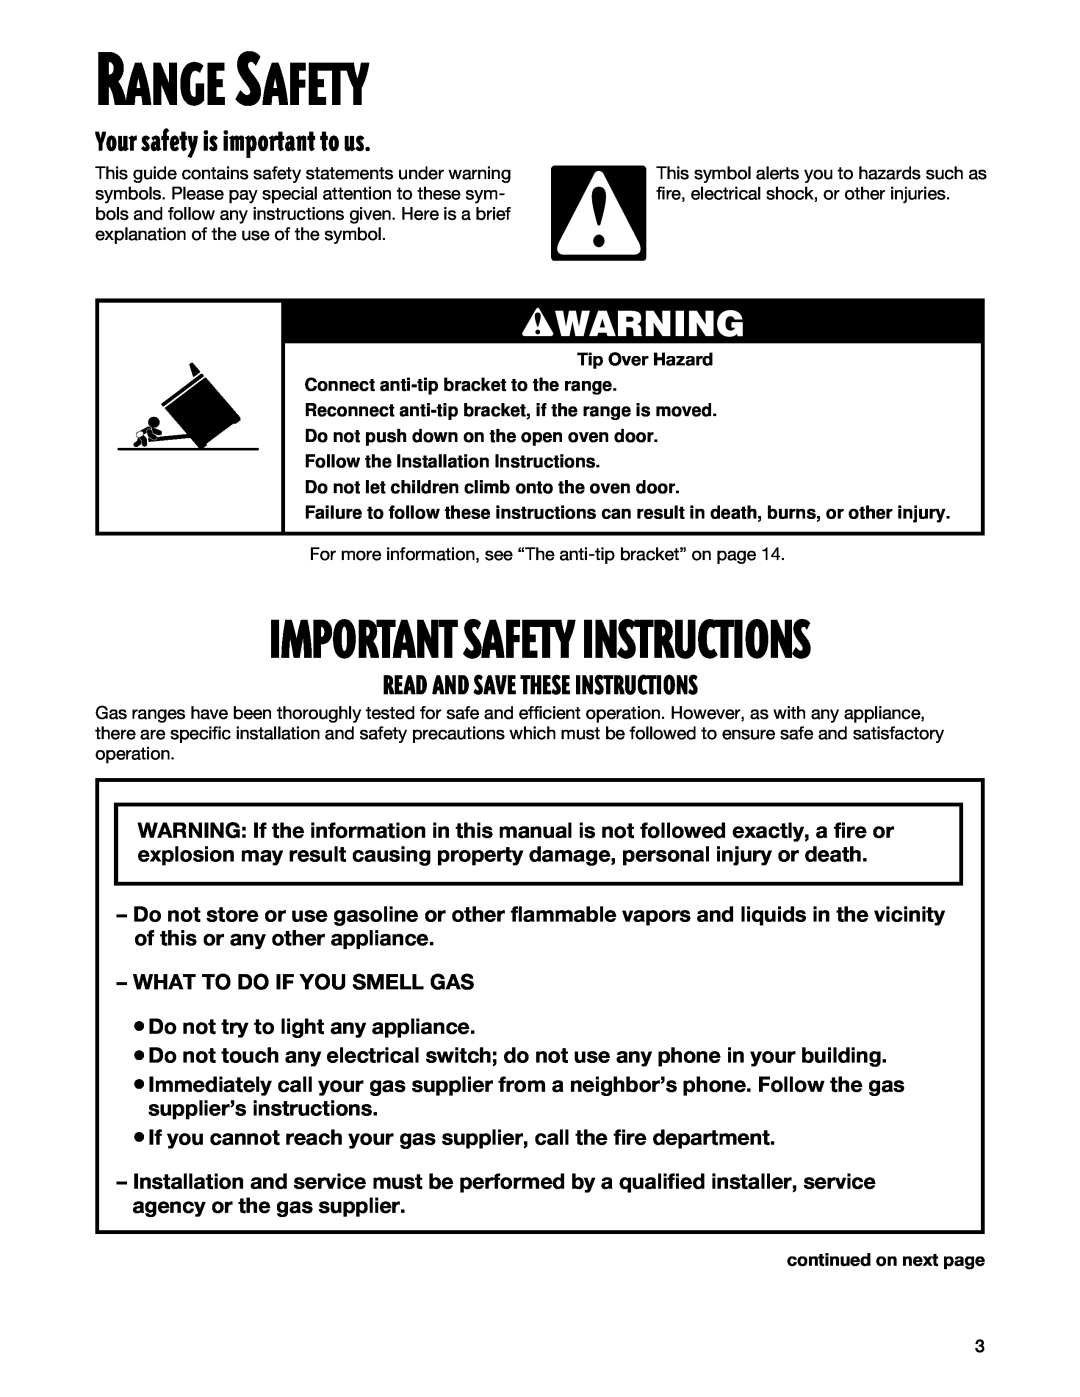 Whirlpool TGP325E manual Range Safety, Your safety is important to us, Read And Save These Instructions, wWARNING 